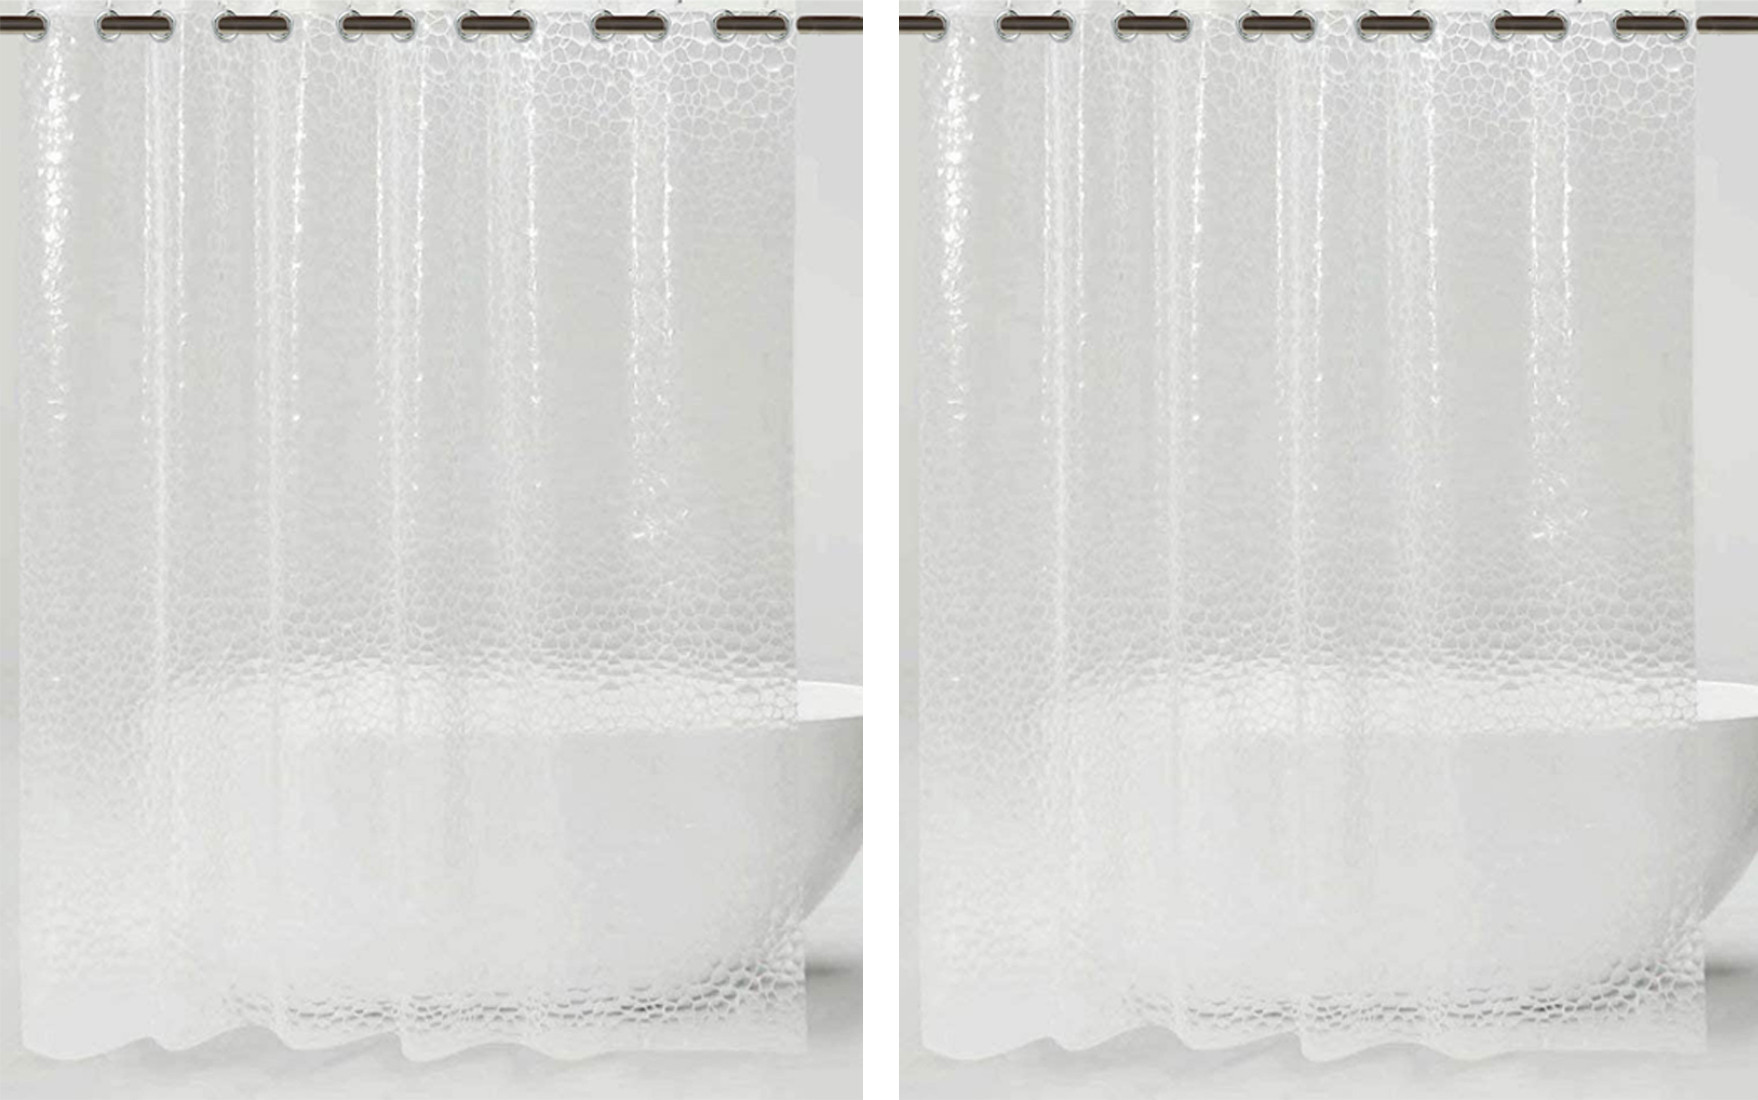 Kuber Industries 0.20mm 3D Stain Resistant, No Odor Clear Waterproof PVC AC Shower Curtain With Eyelets,8 Feet (Transparent)-HS_38_KUBMART21305